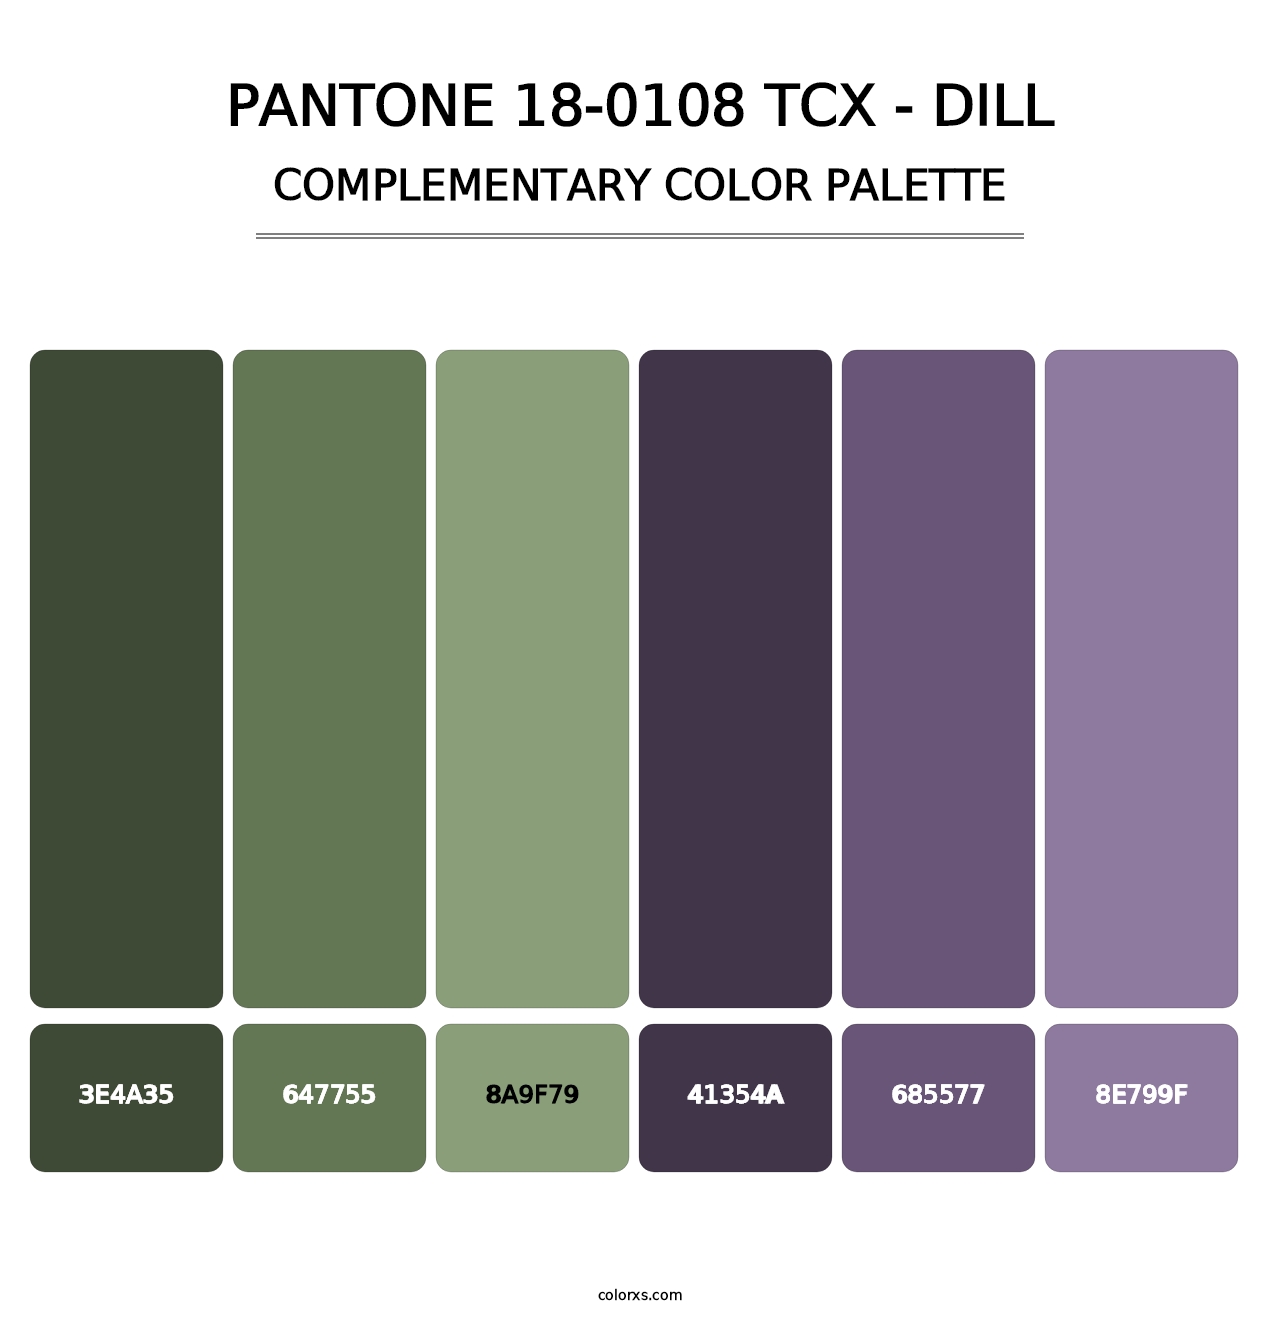 PANTONE 18-0108 TCX - Dill - Complementary Color Palette